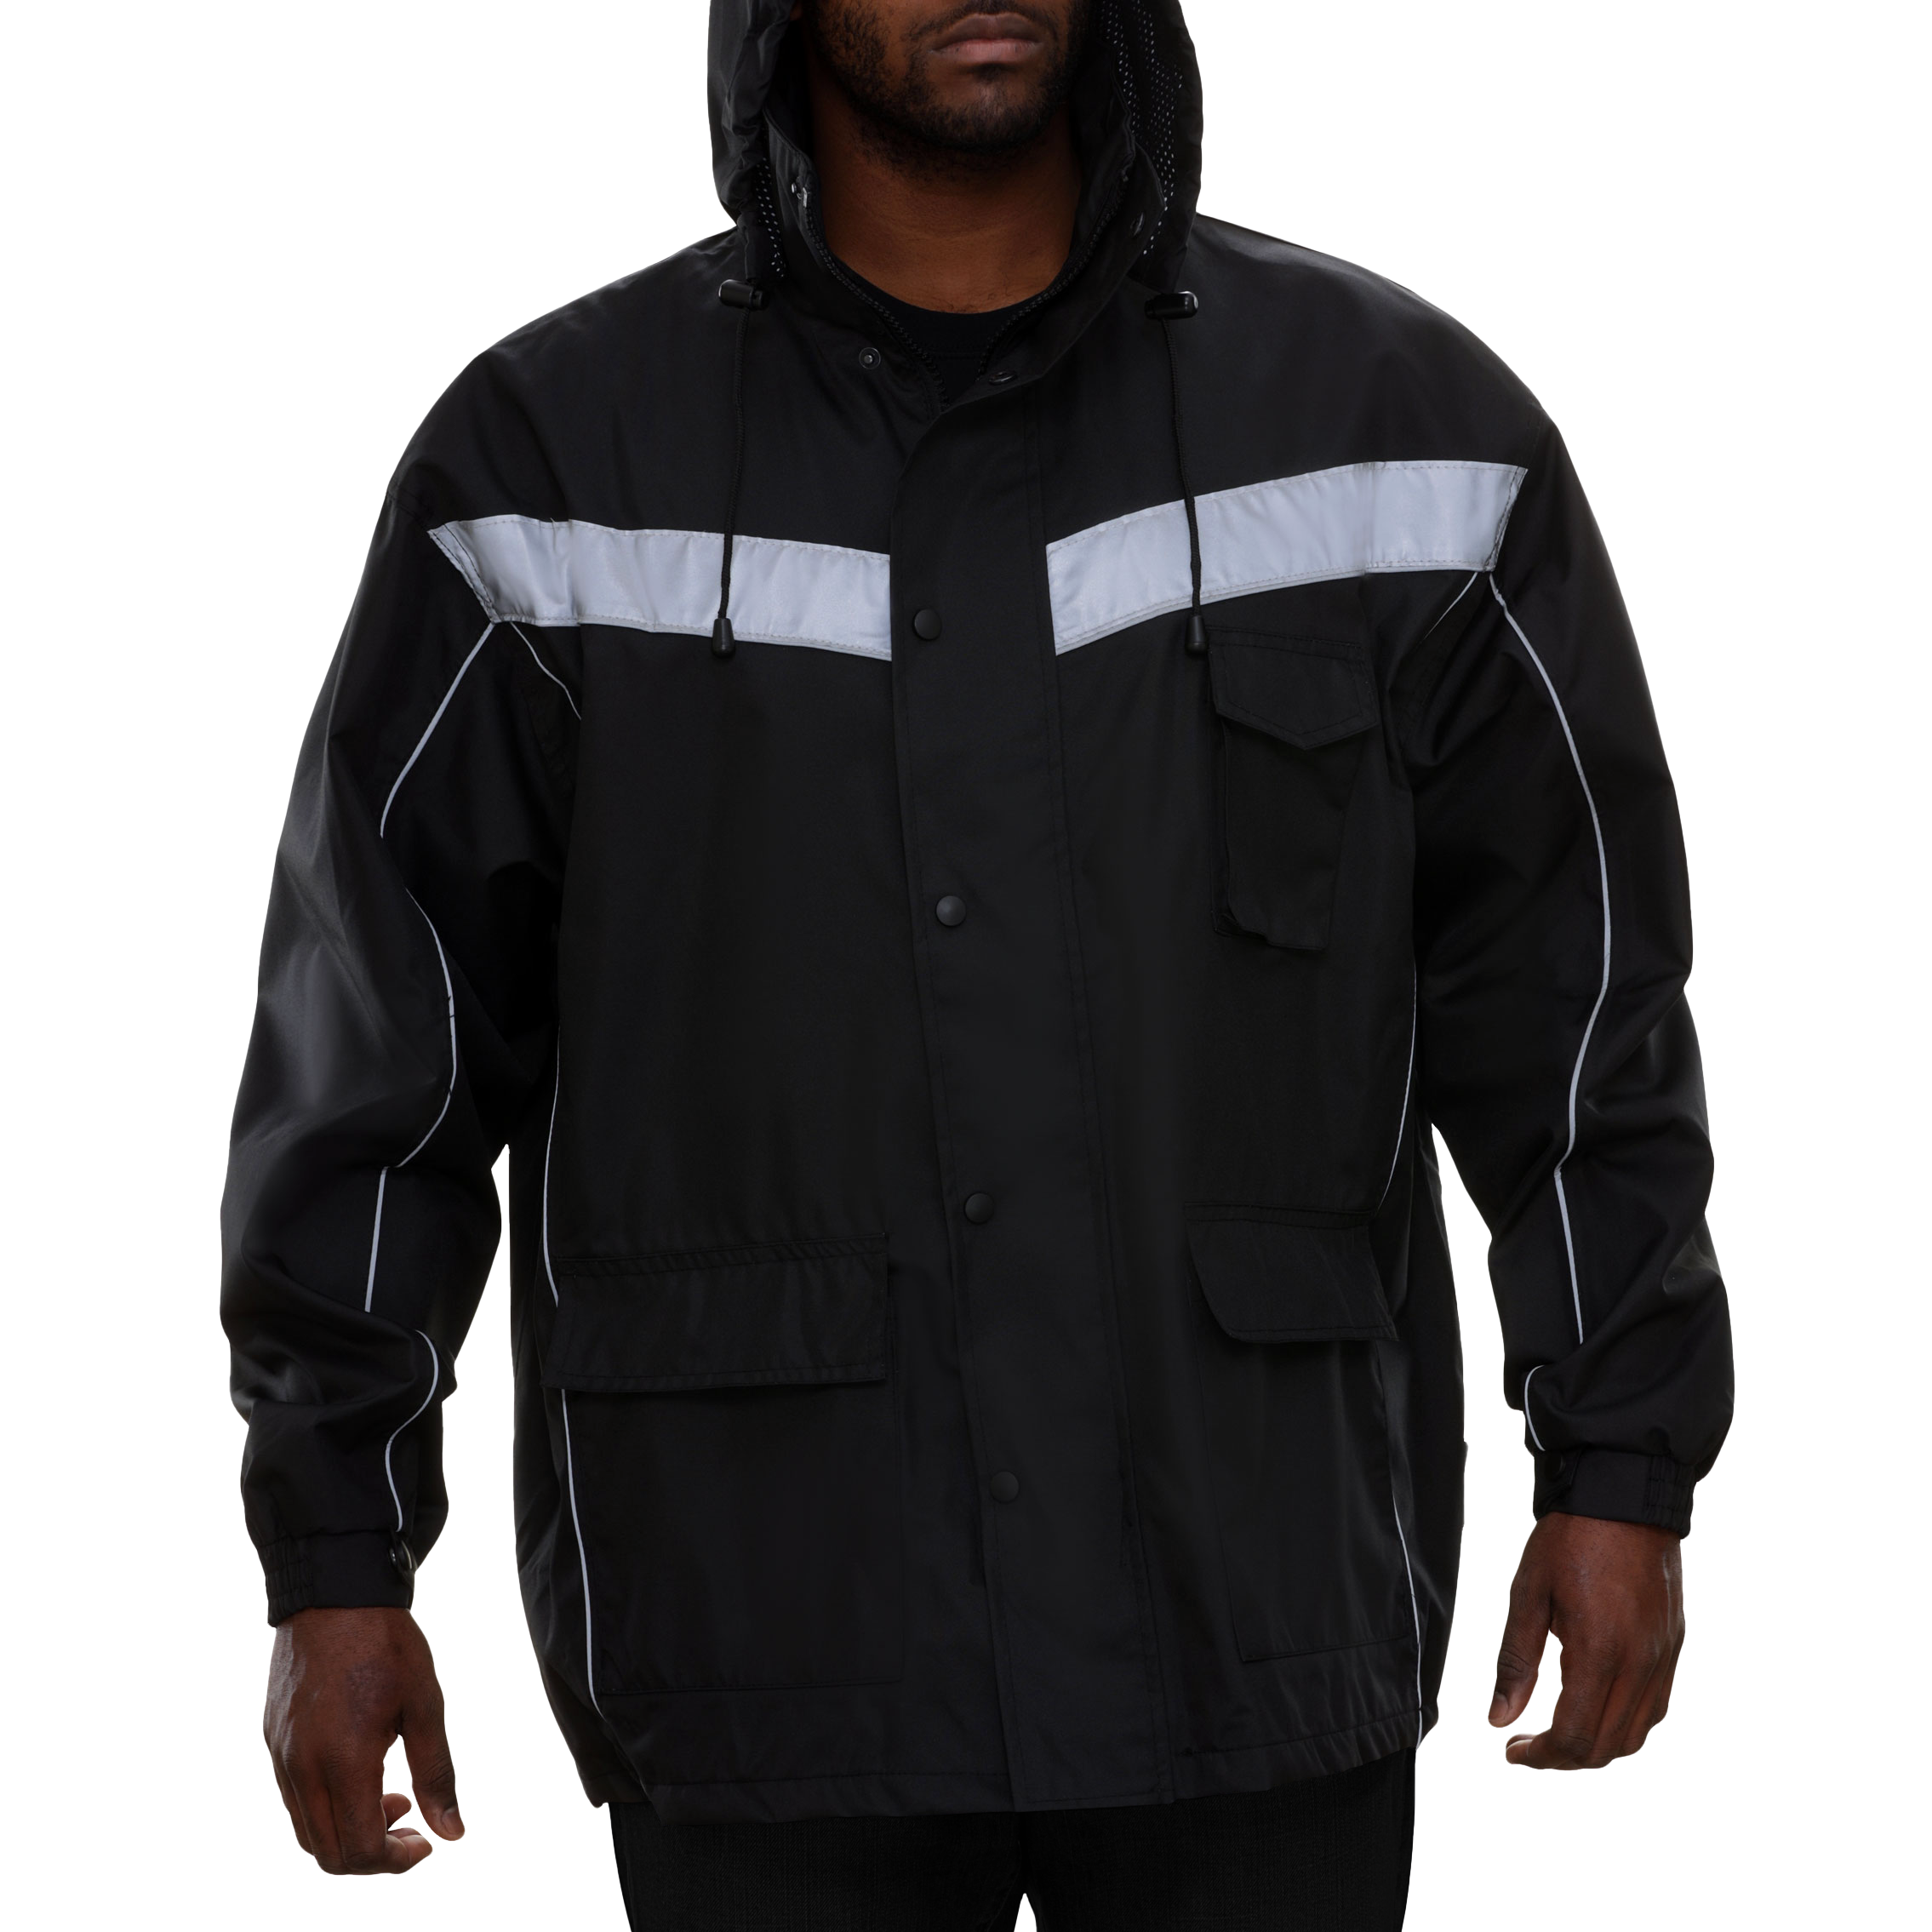 Reflective Jacket Parka Breathable Waterproof Hooded-eSafety Supplies, Inc